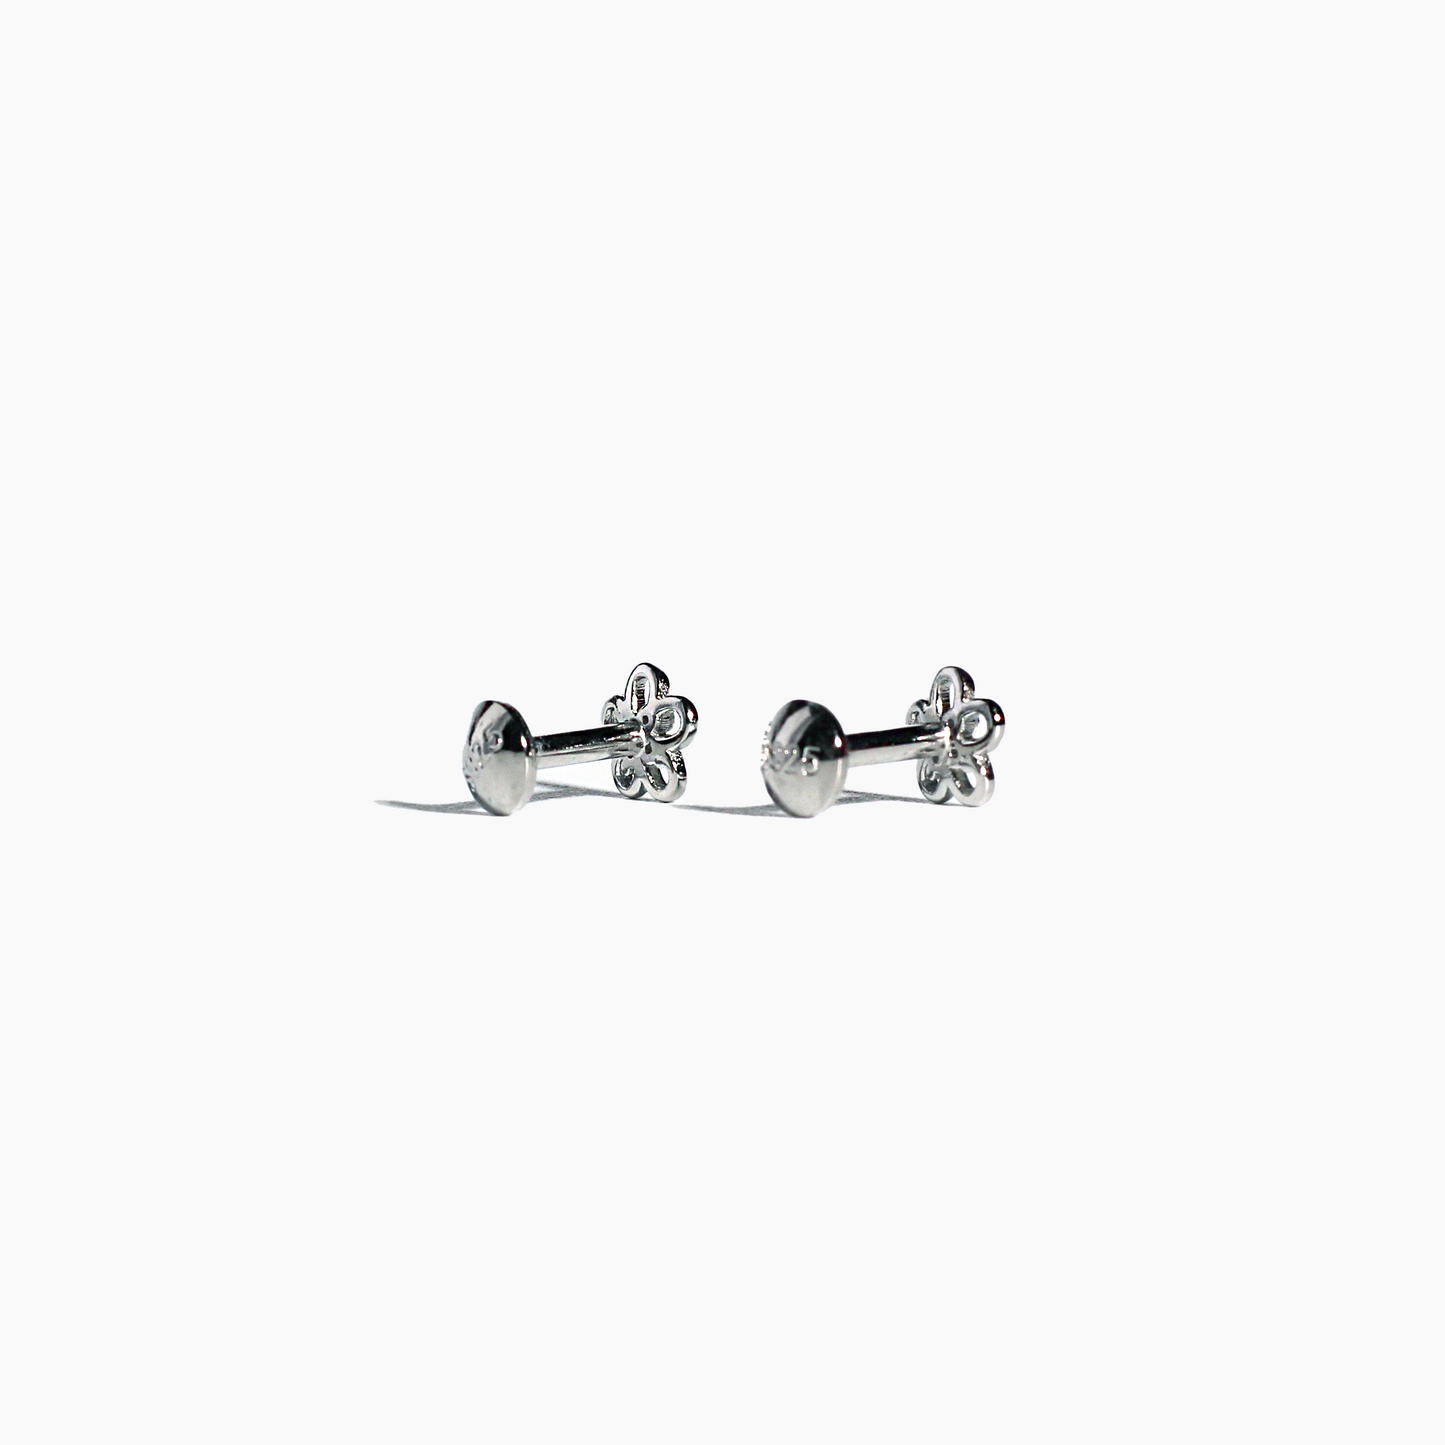 Cheery Blossom 925 Sterling Silver Studs